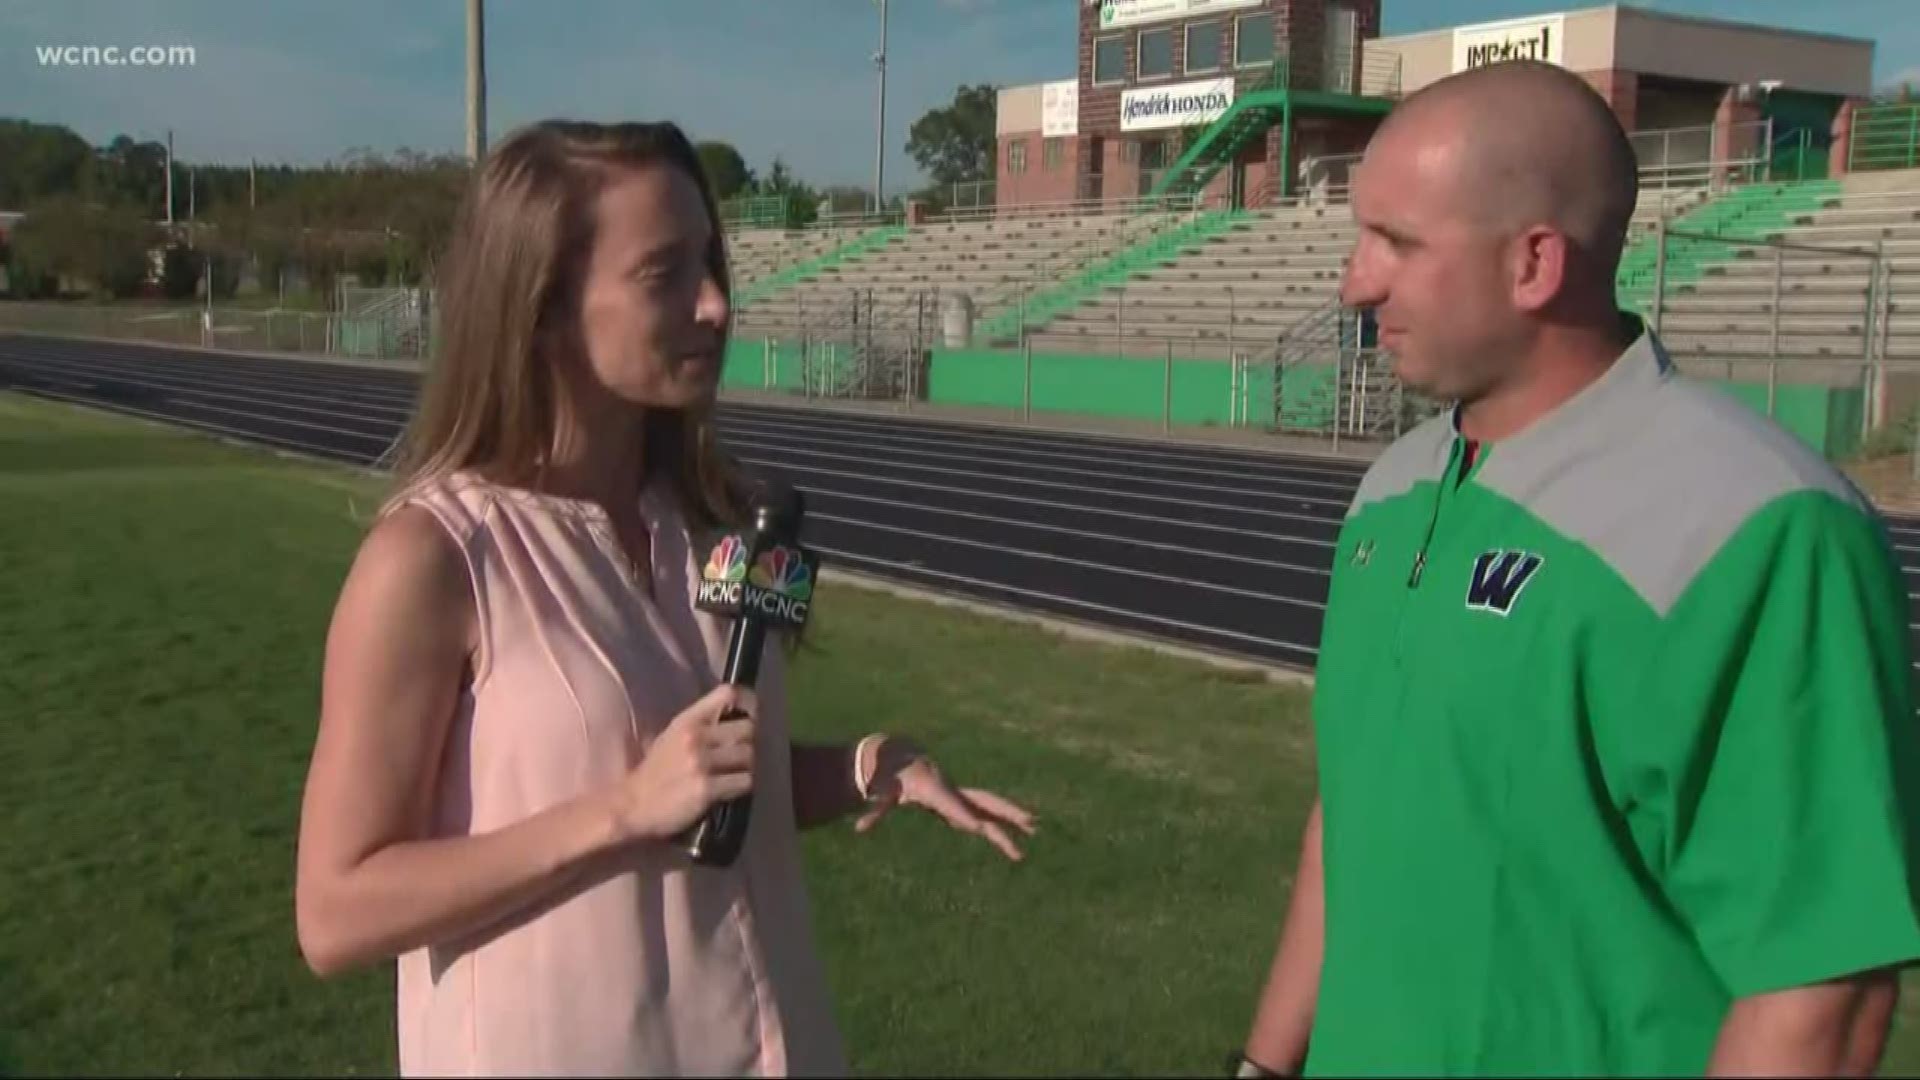 Week 7 of high school football, NBC Charlotte's Ashley Stroehlein caught up with Warriors head coach Andy Capone to talk about tonight's matchup.